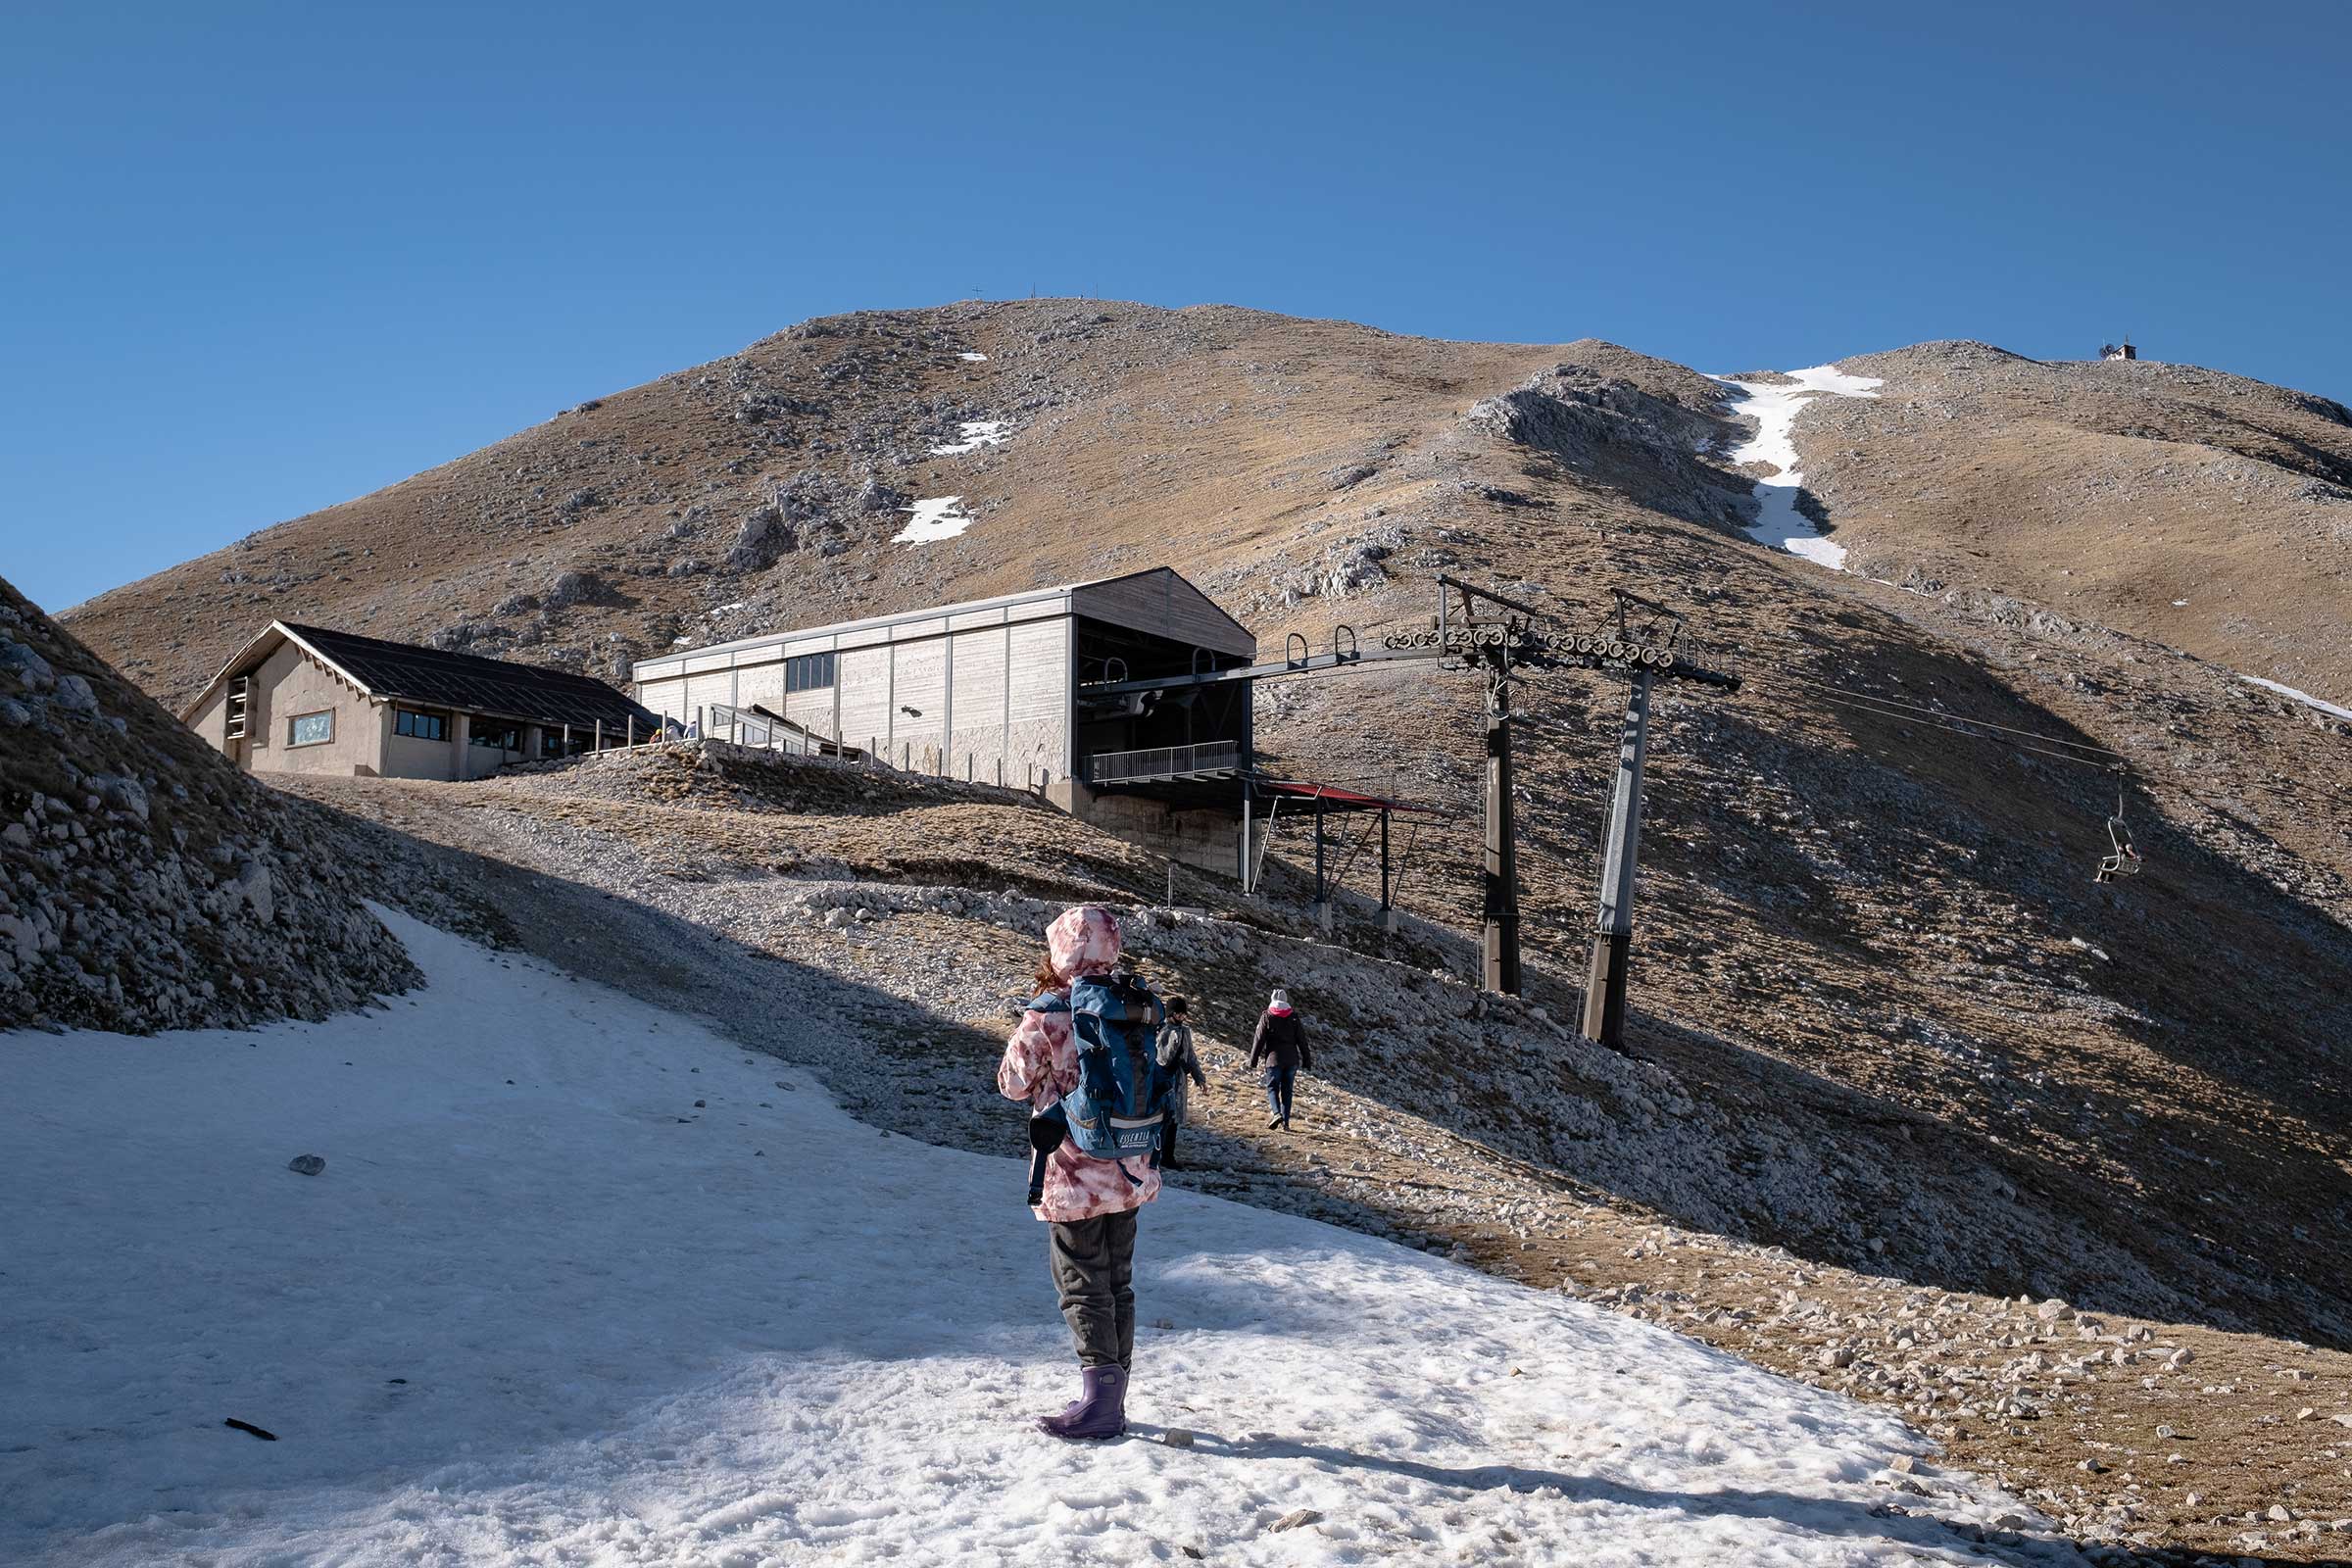 Campitello Matese, a popular ski resort in central-southern Italy, cannot support skiers this season due to high temperatures and lack of snow. (Manuel Dorati)